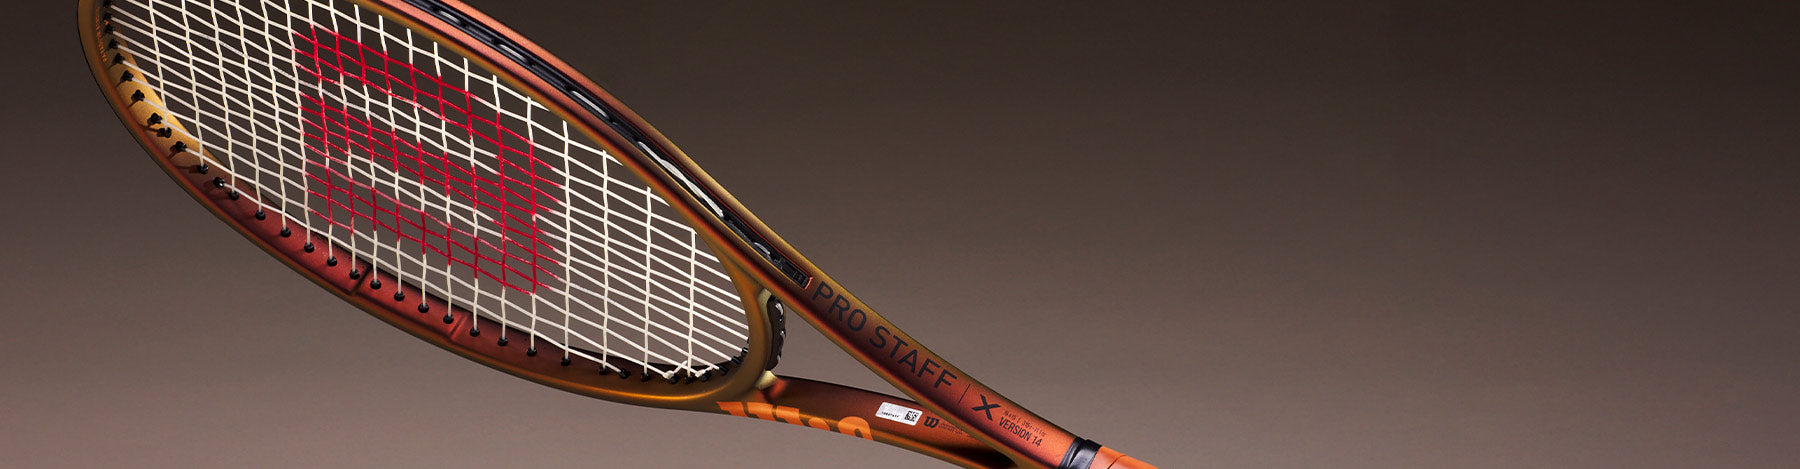 A gold-colored Wilson Pro Staff v14 tennis racquet on a gradiated background.